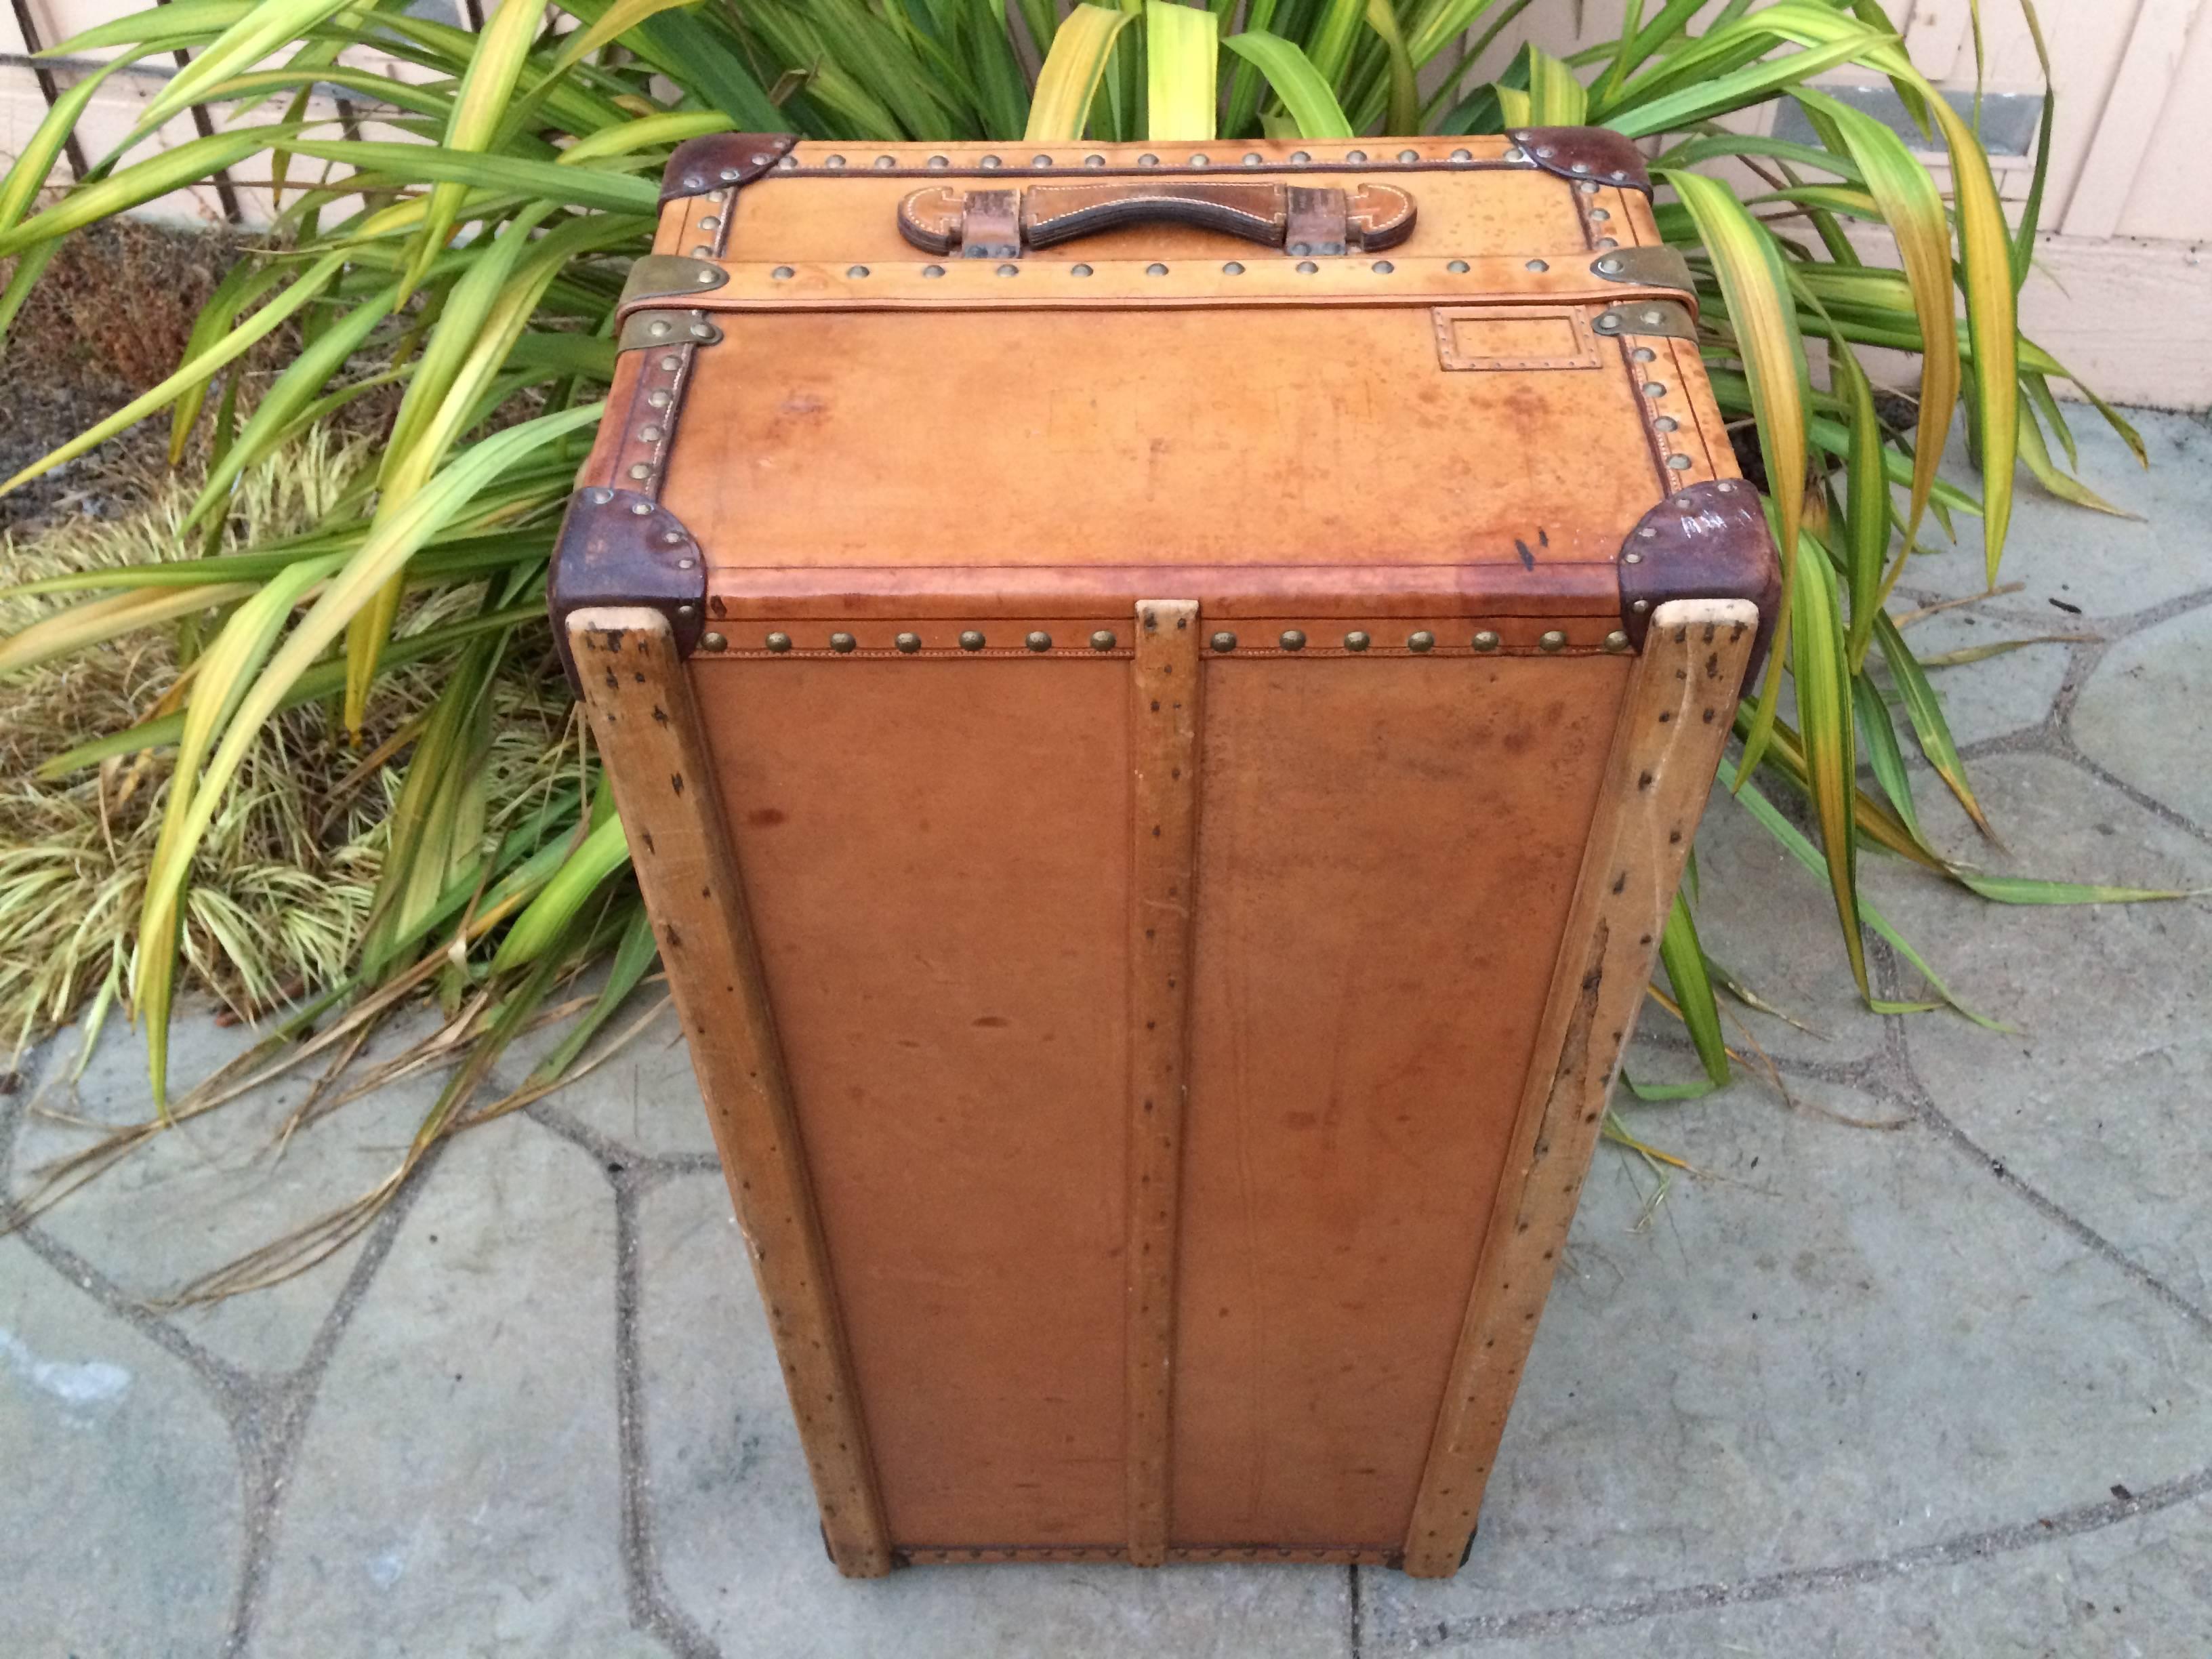 Magnificent, unrestored, original and untouched antique Louis Vuitton leather steamer wardrobe trunk. This trunk is truly in magnificent unrestored condition. Trunk measures in inches 17 x 22 x 45. This gorgeous Louis Vuitton